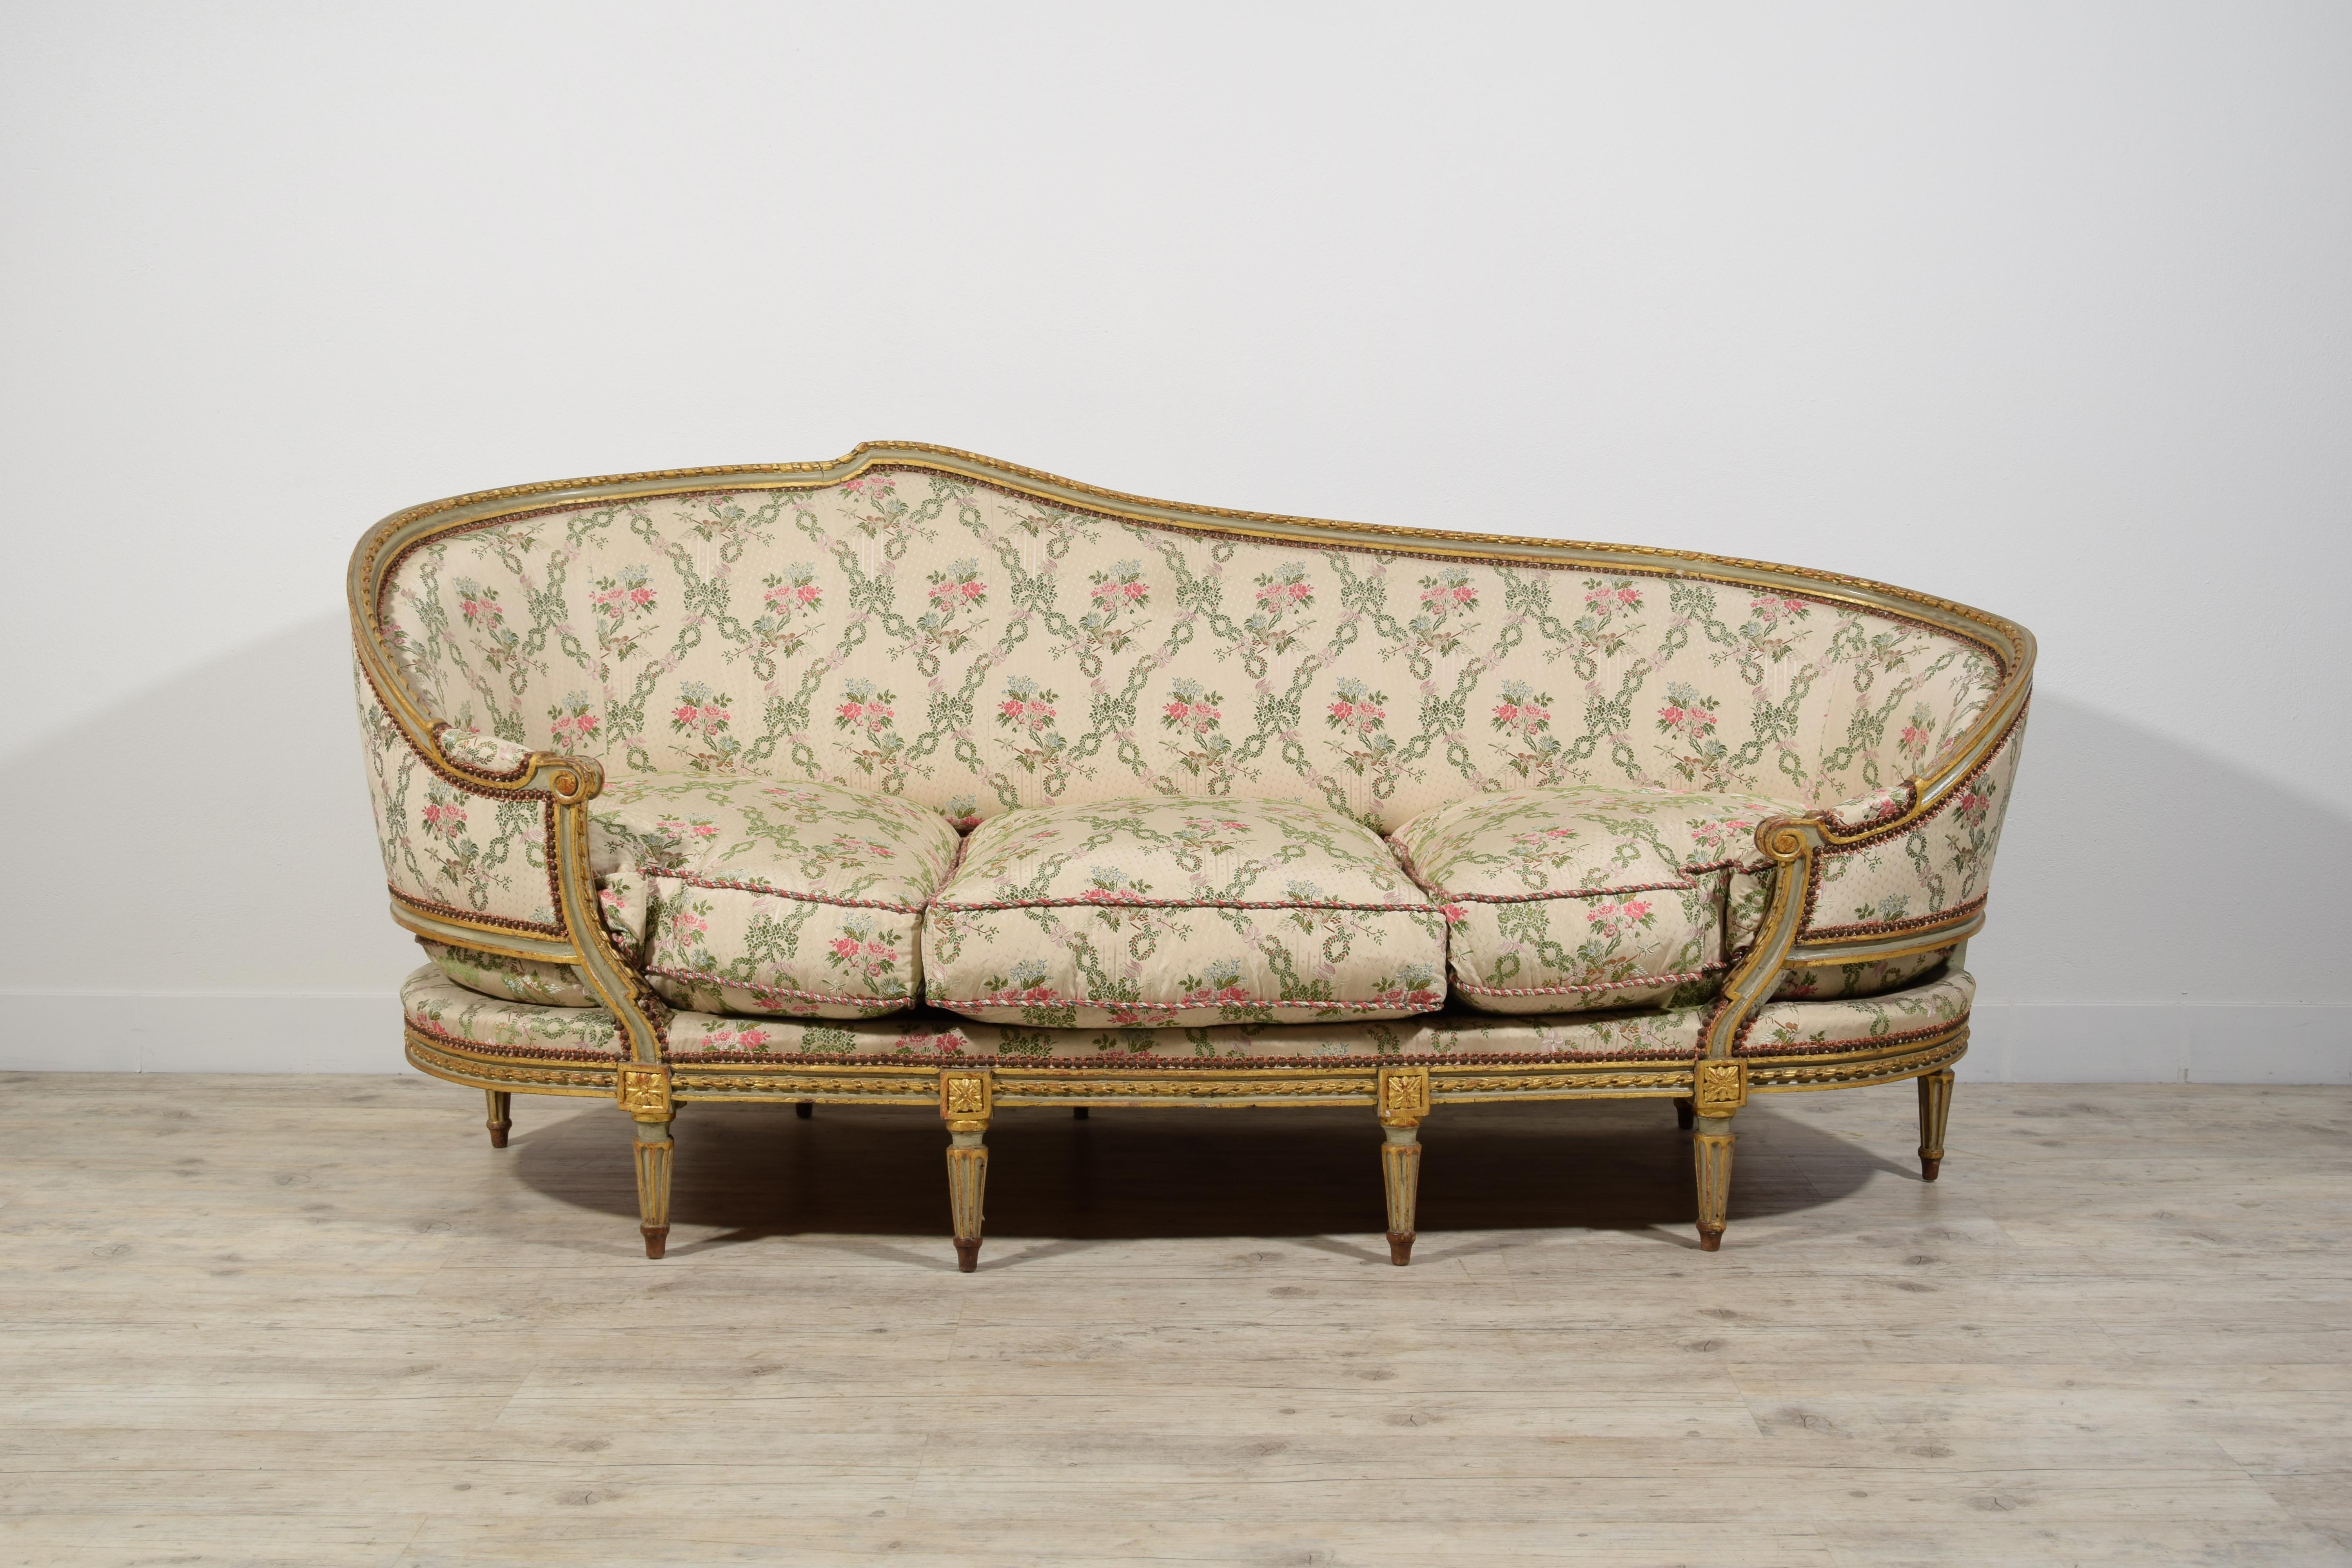 Wood 18th Century, French Laquered Giltwood Louis XVI Sofa by Pierre Nicolas Pillot